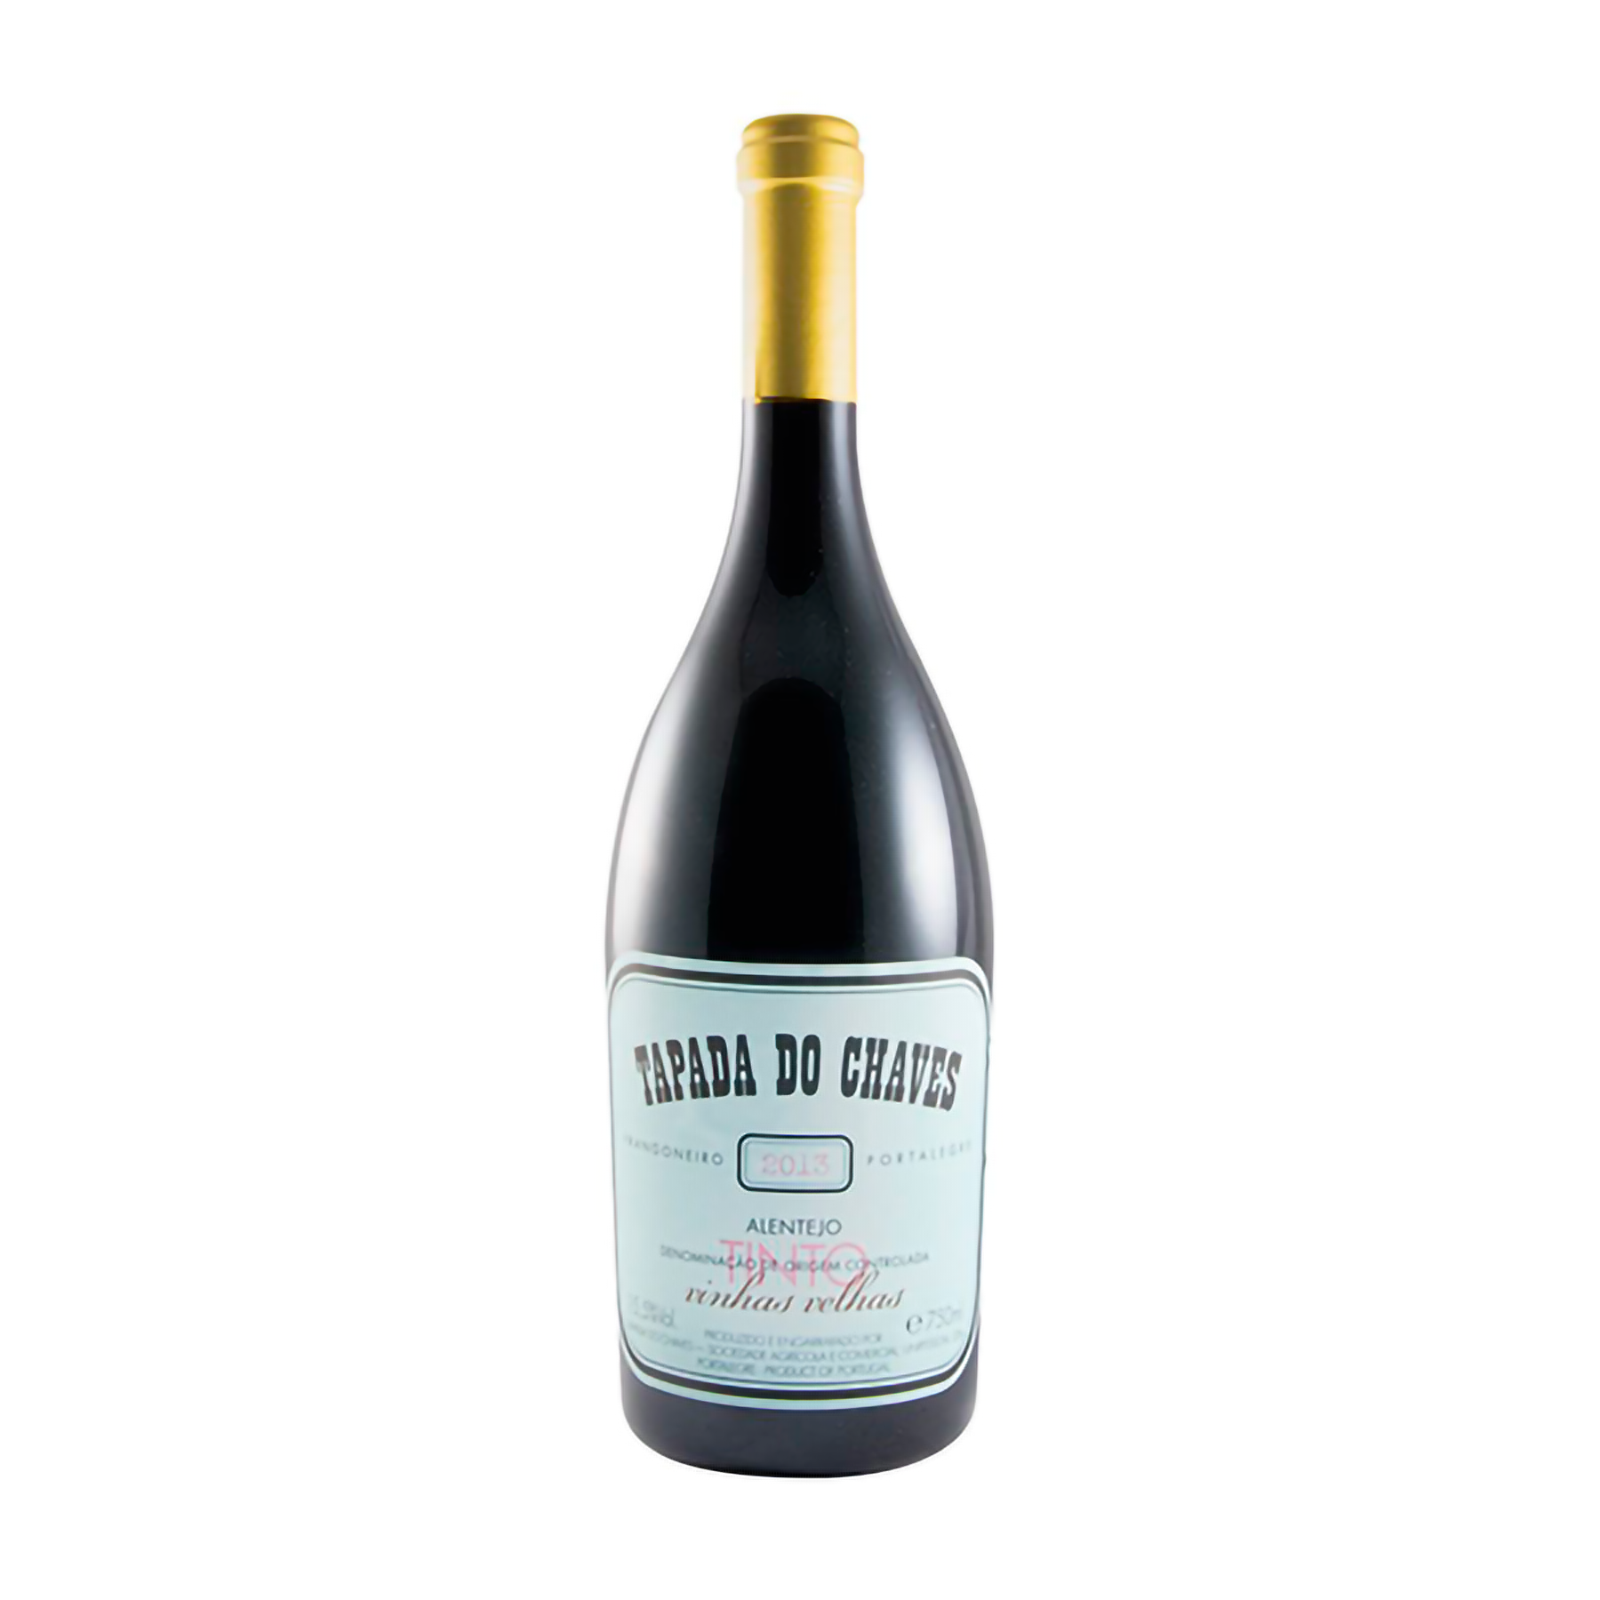 Tapada do Chaves Old Vines Red 2013